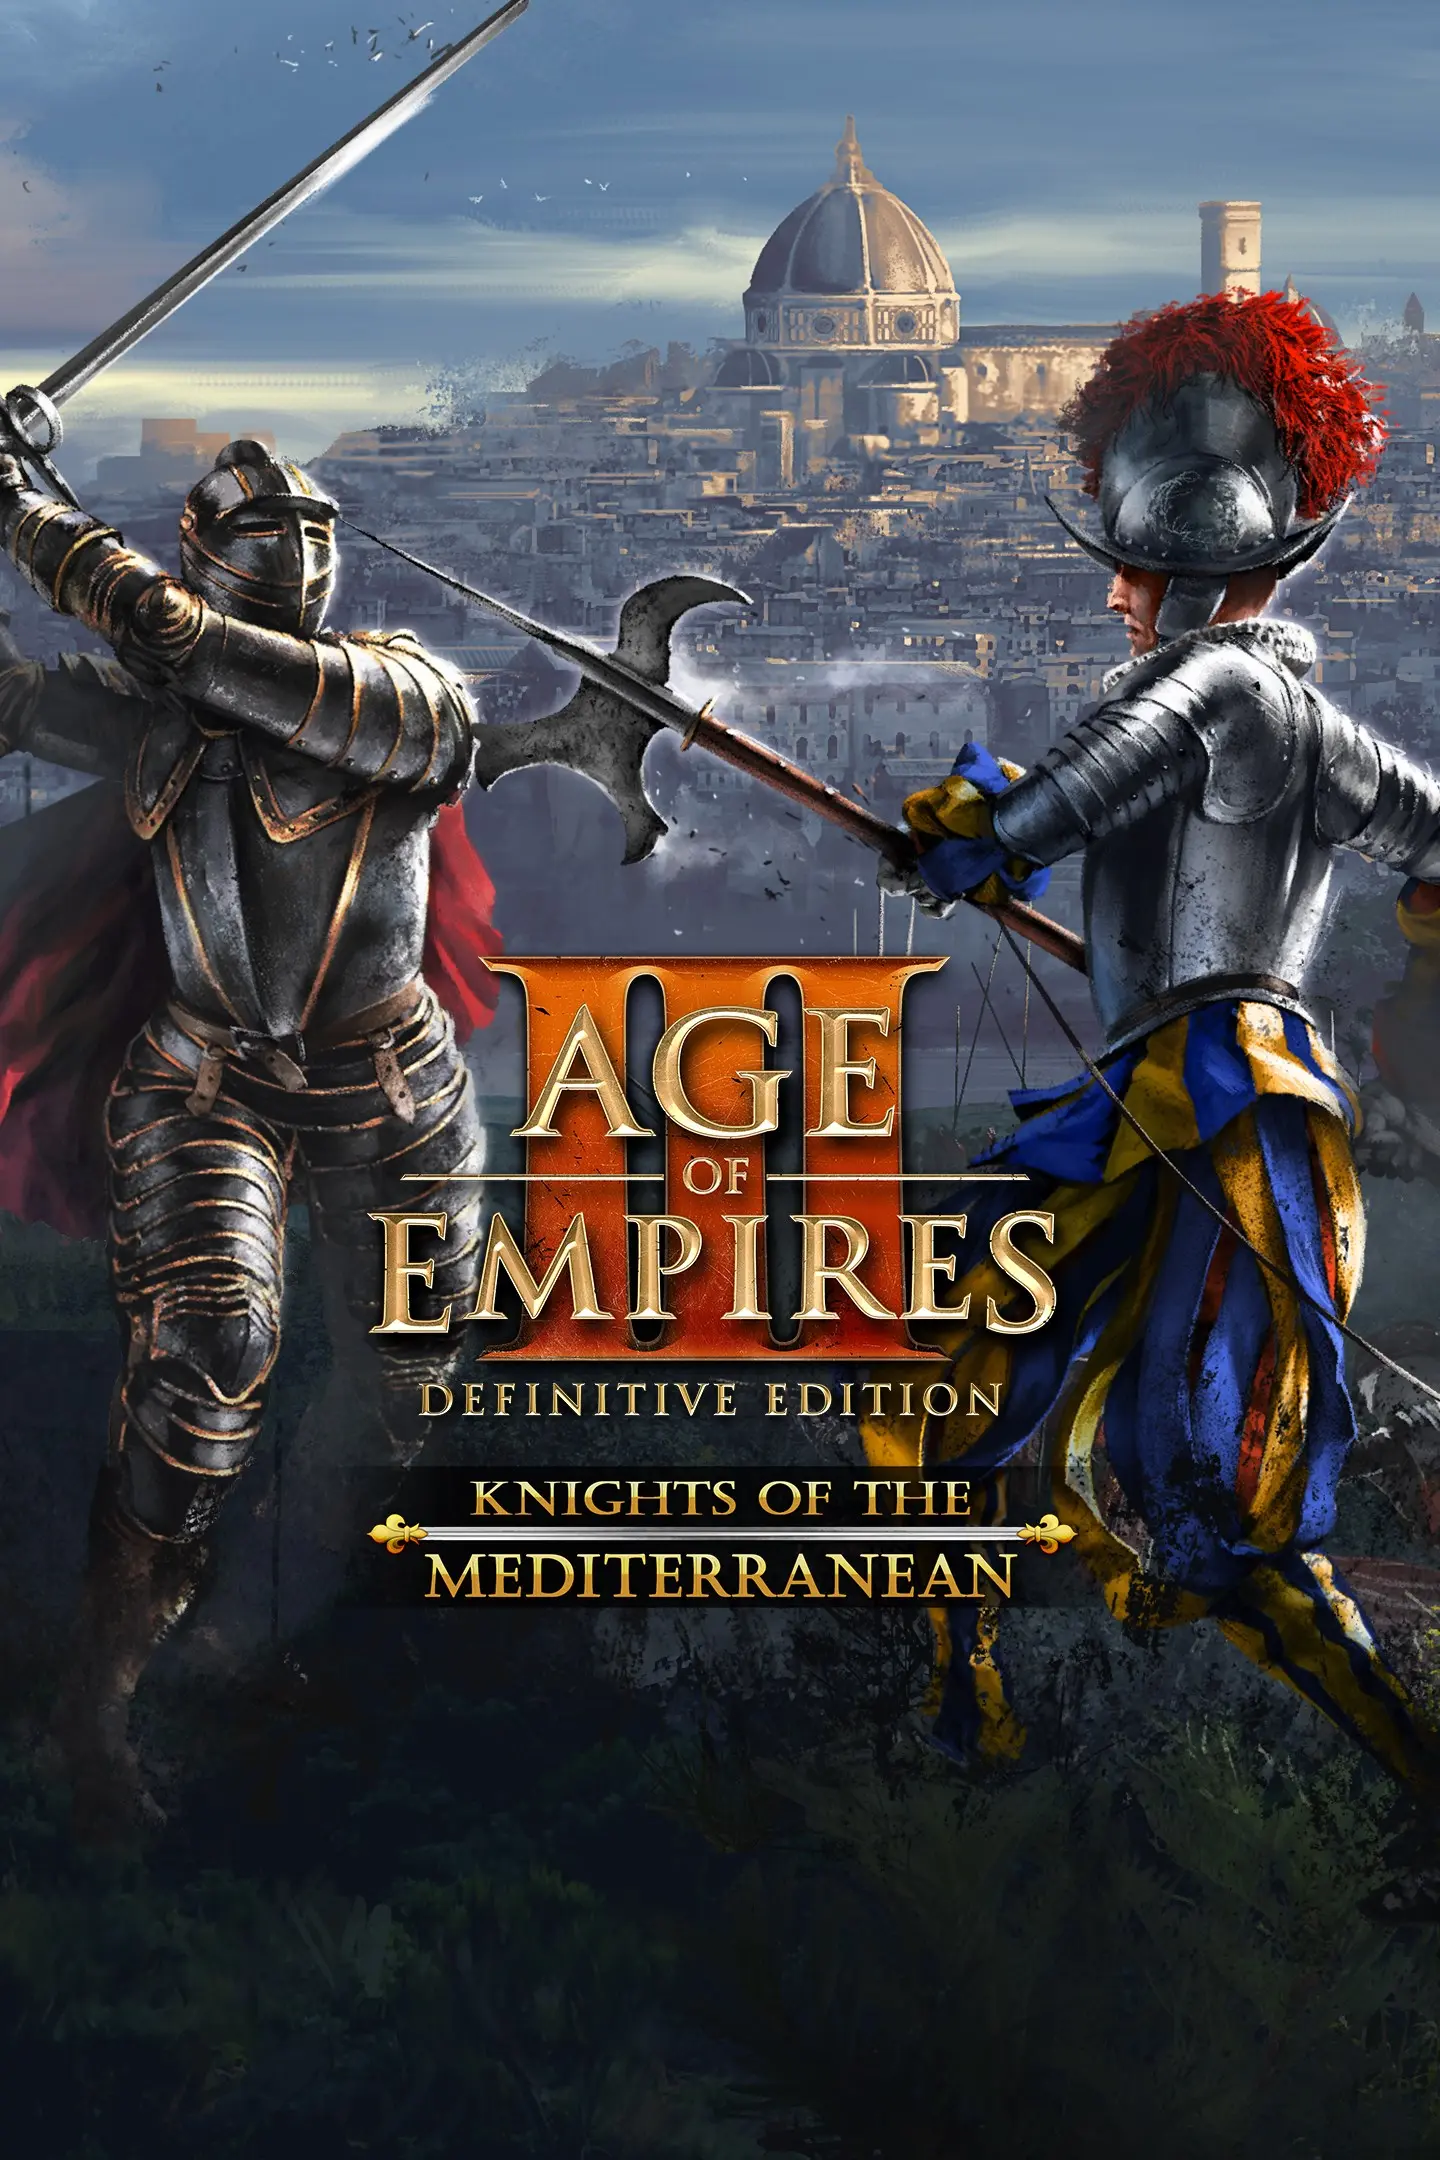 Age of Empires III: Definitive Edition - Knights of the Mediterranean DLC (PC) - Steam - Digital Code